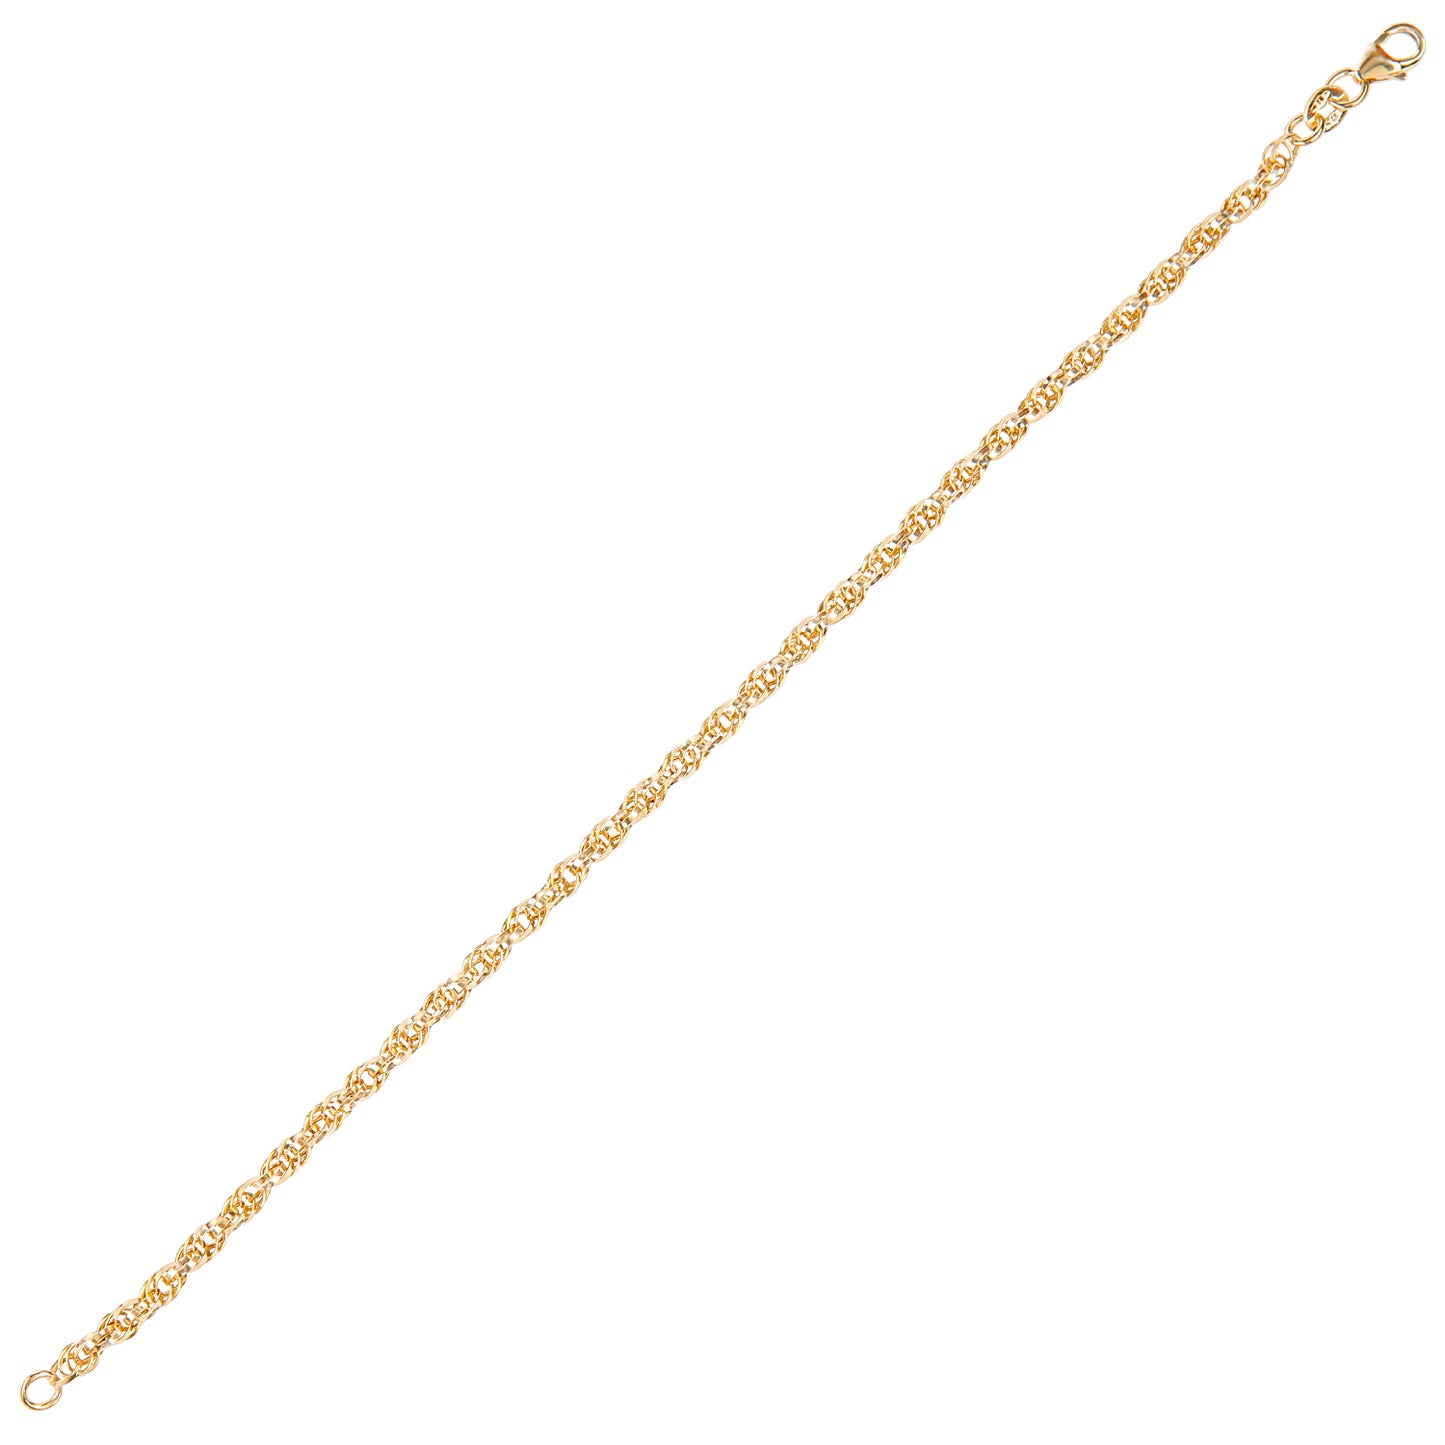 9ct Gold  Prince Of Wales Chain Bracelet 3mm 7.5 inch - BT1AXL802Y